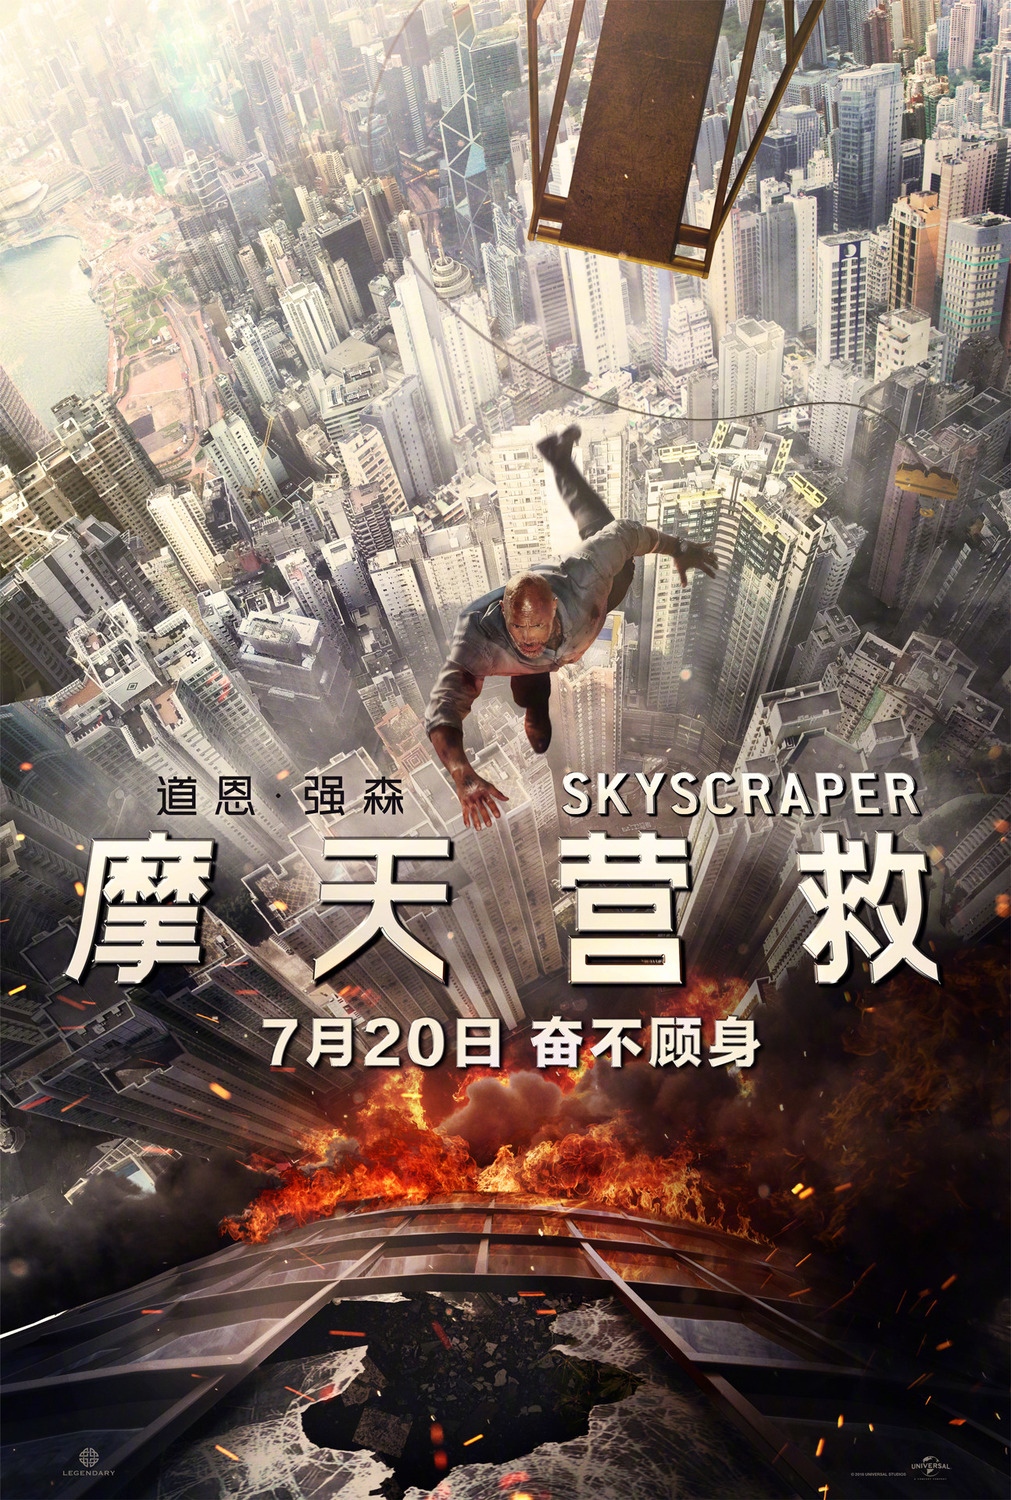 Extra Large Movie Poster Image for Skyscraper (#4 of 7)